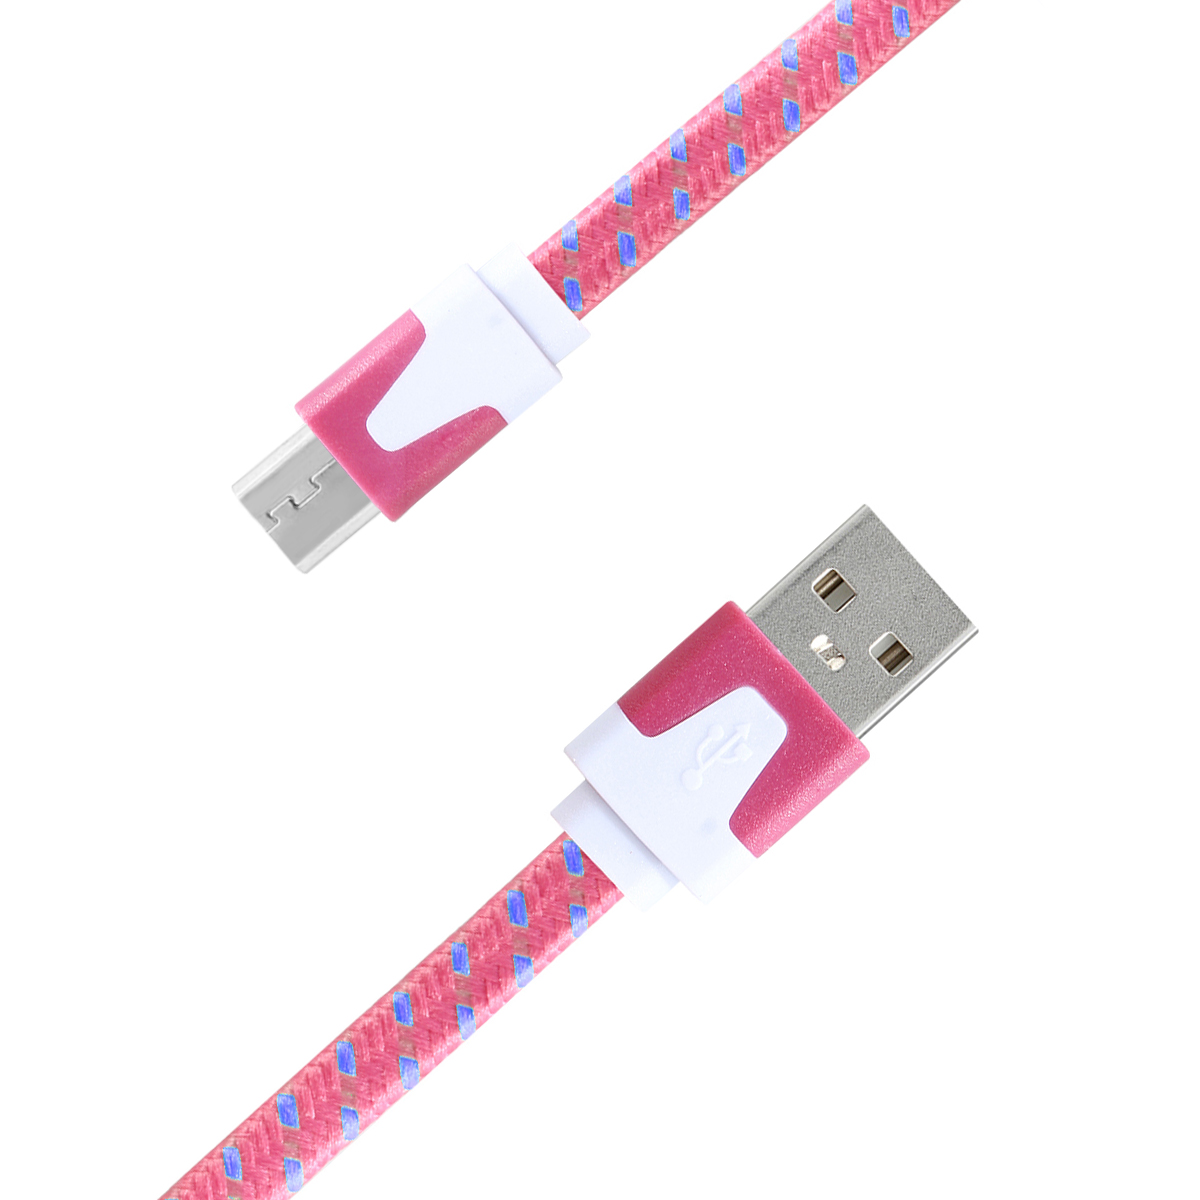 1m Weave Braid USB Data Sync Charging Cable for Samsung Android Phones - Pink